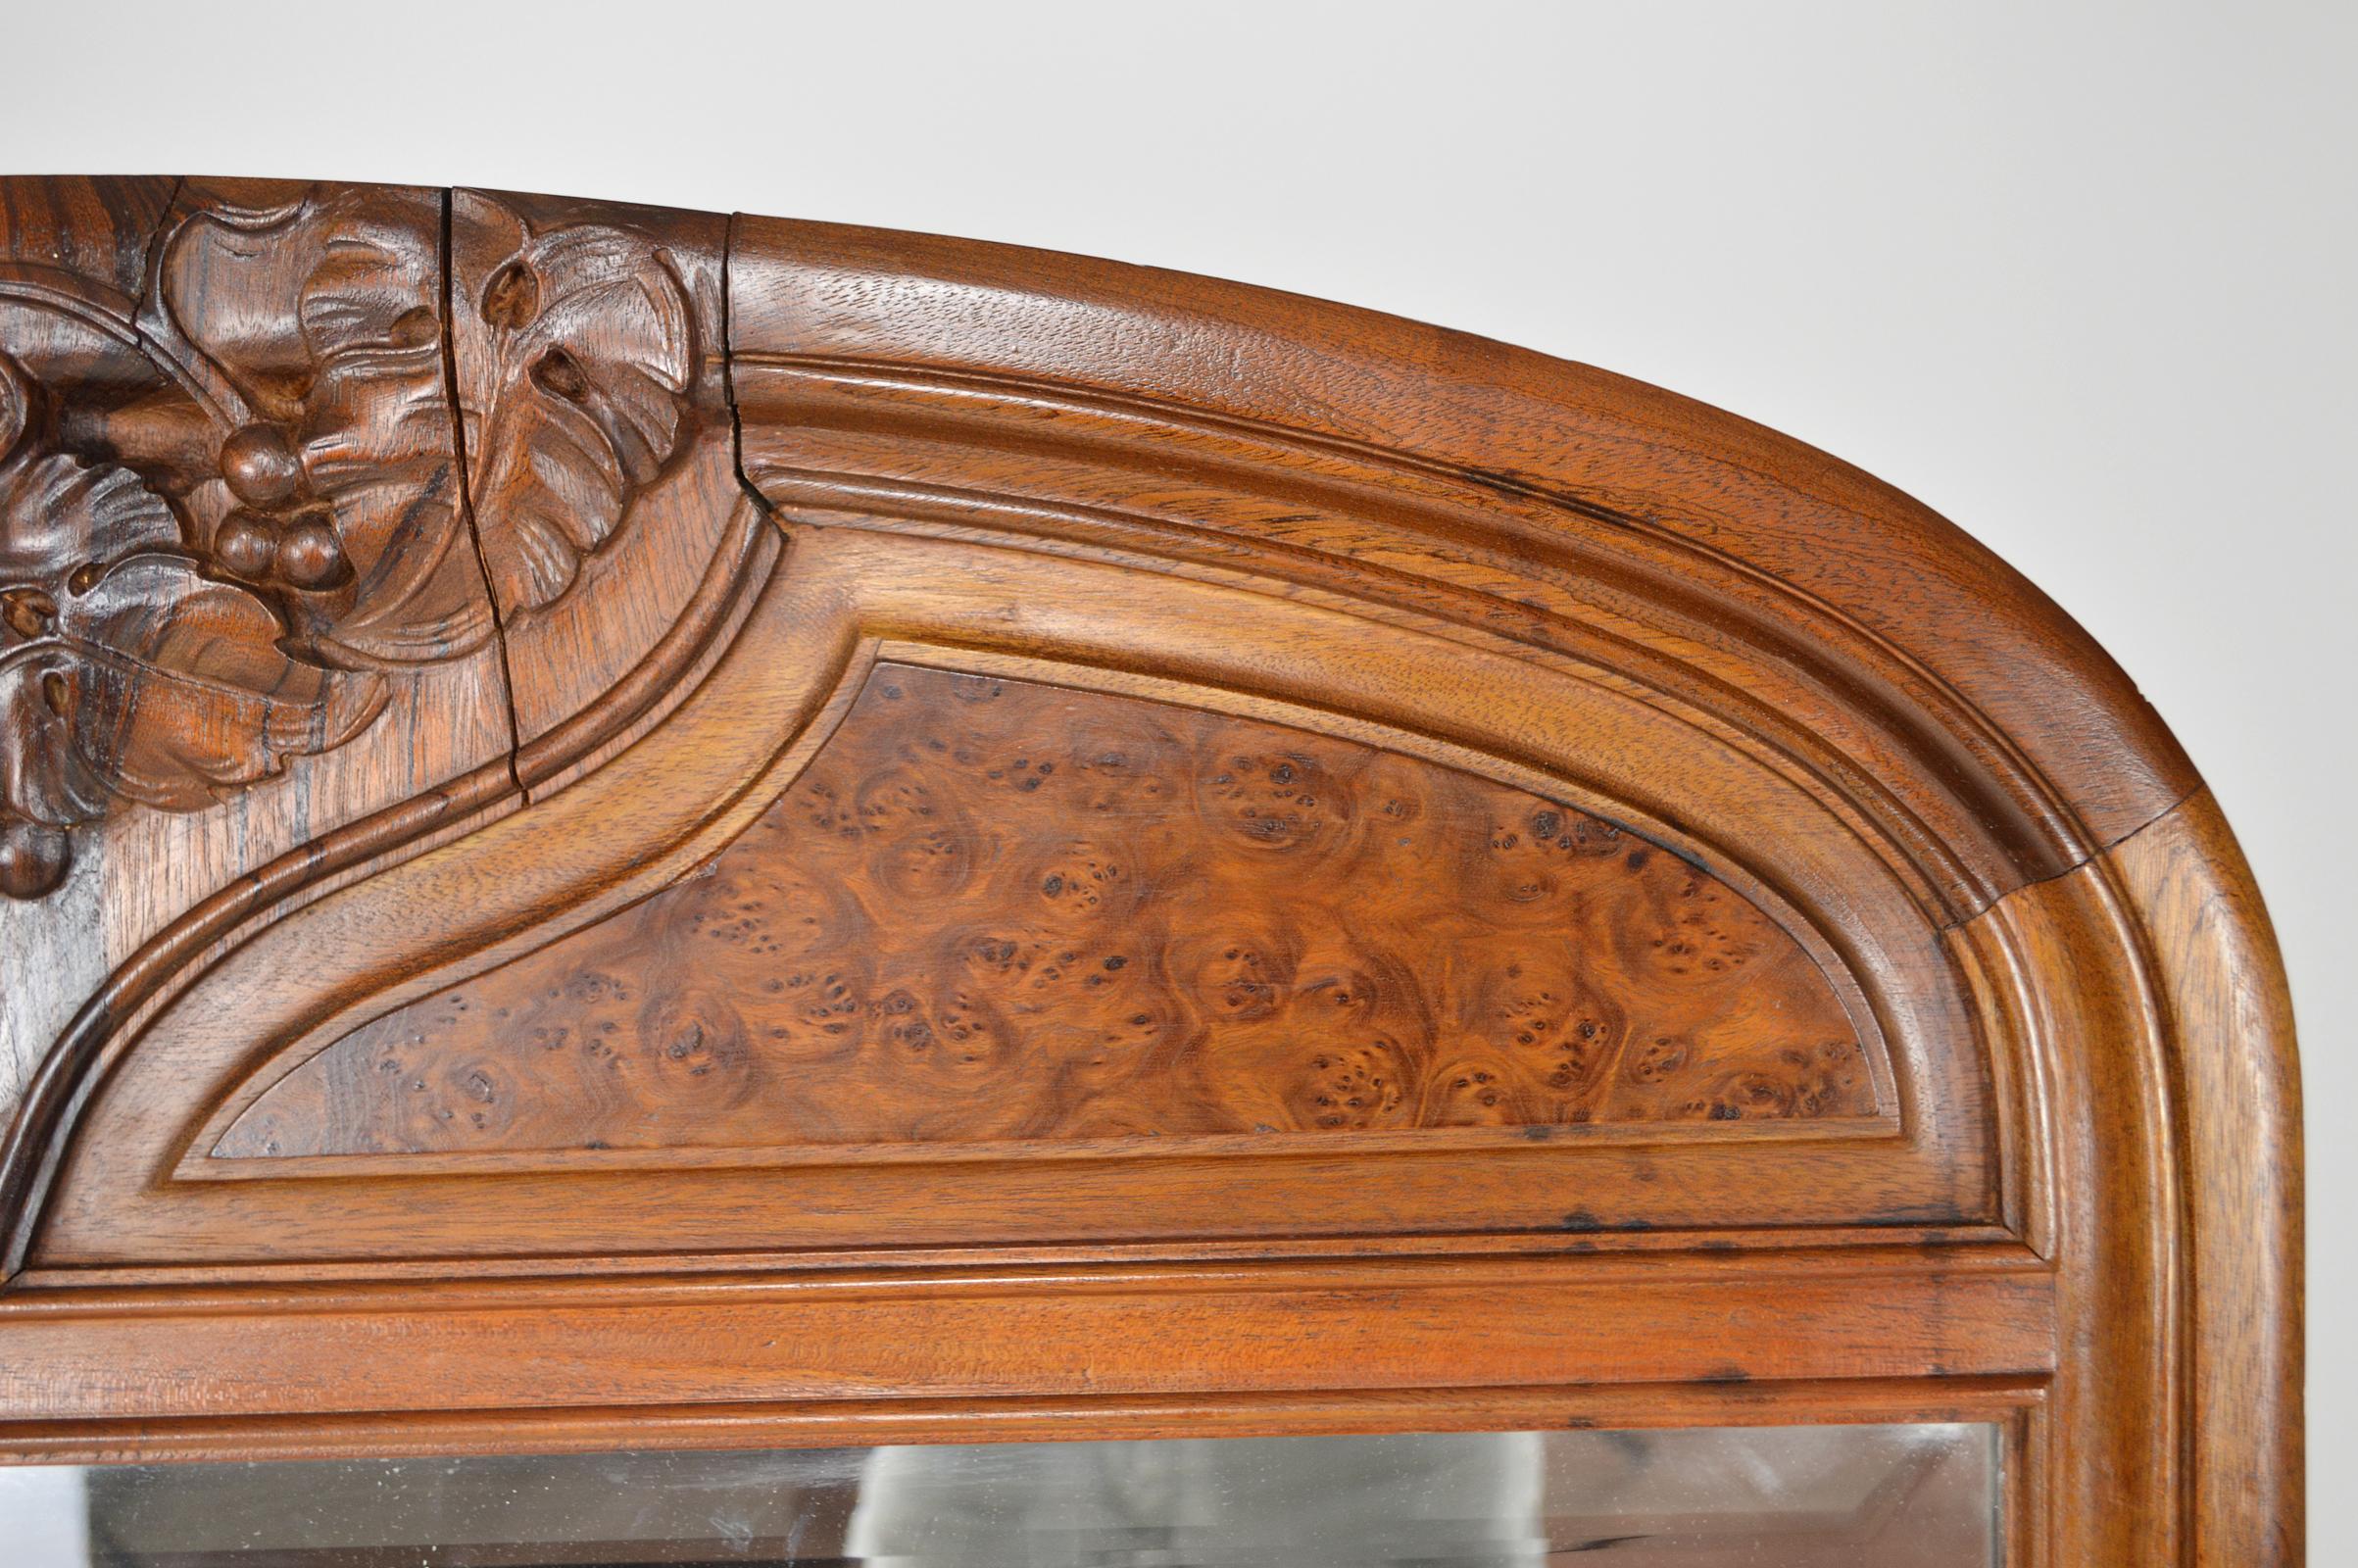 French Art Nouveau Fireplace Mantel Mirror, Carved Walnut and Burl, circa 1905 For Sale 1